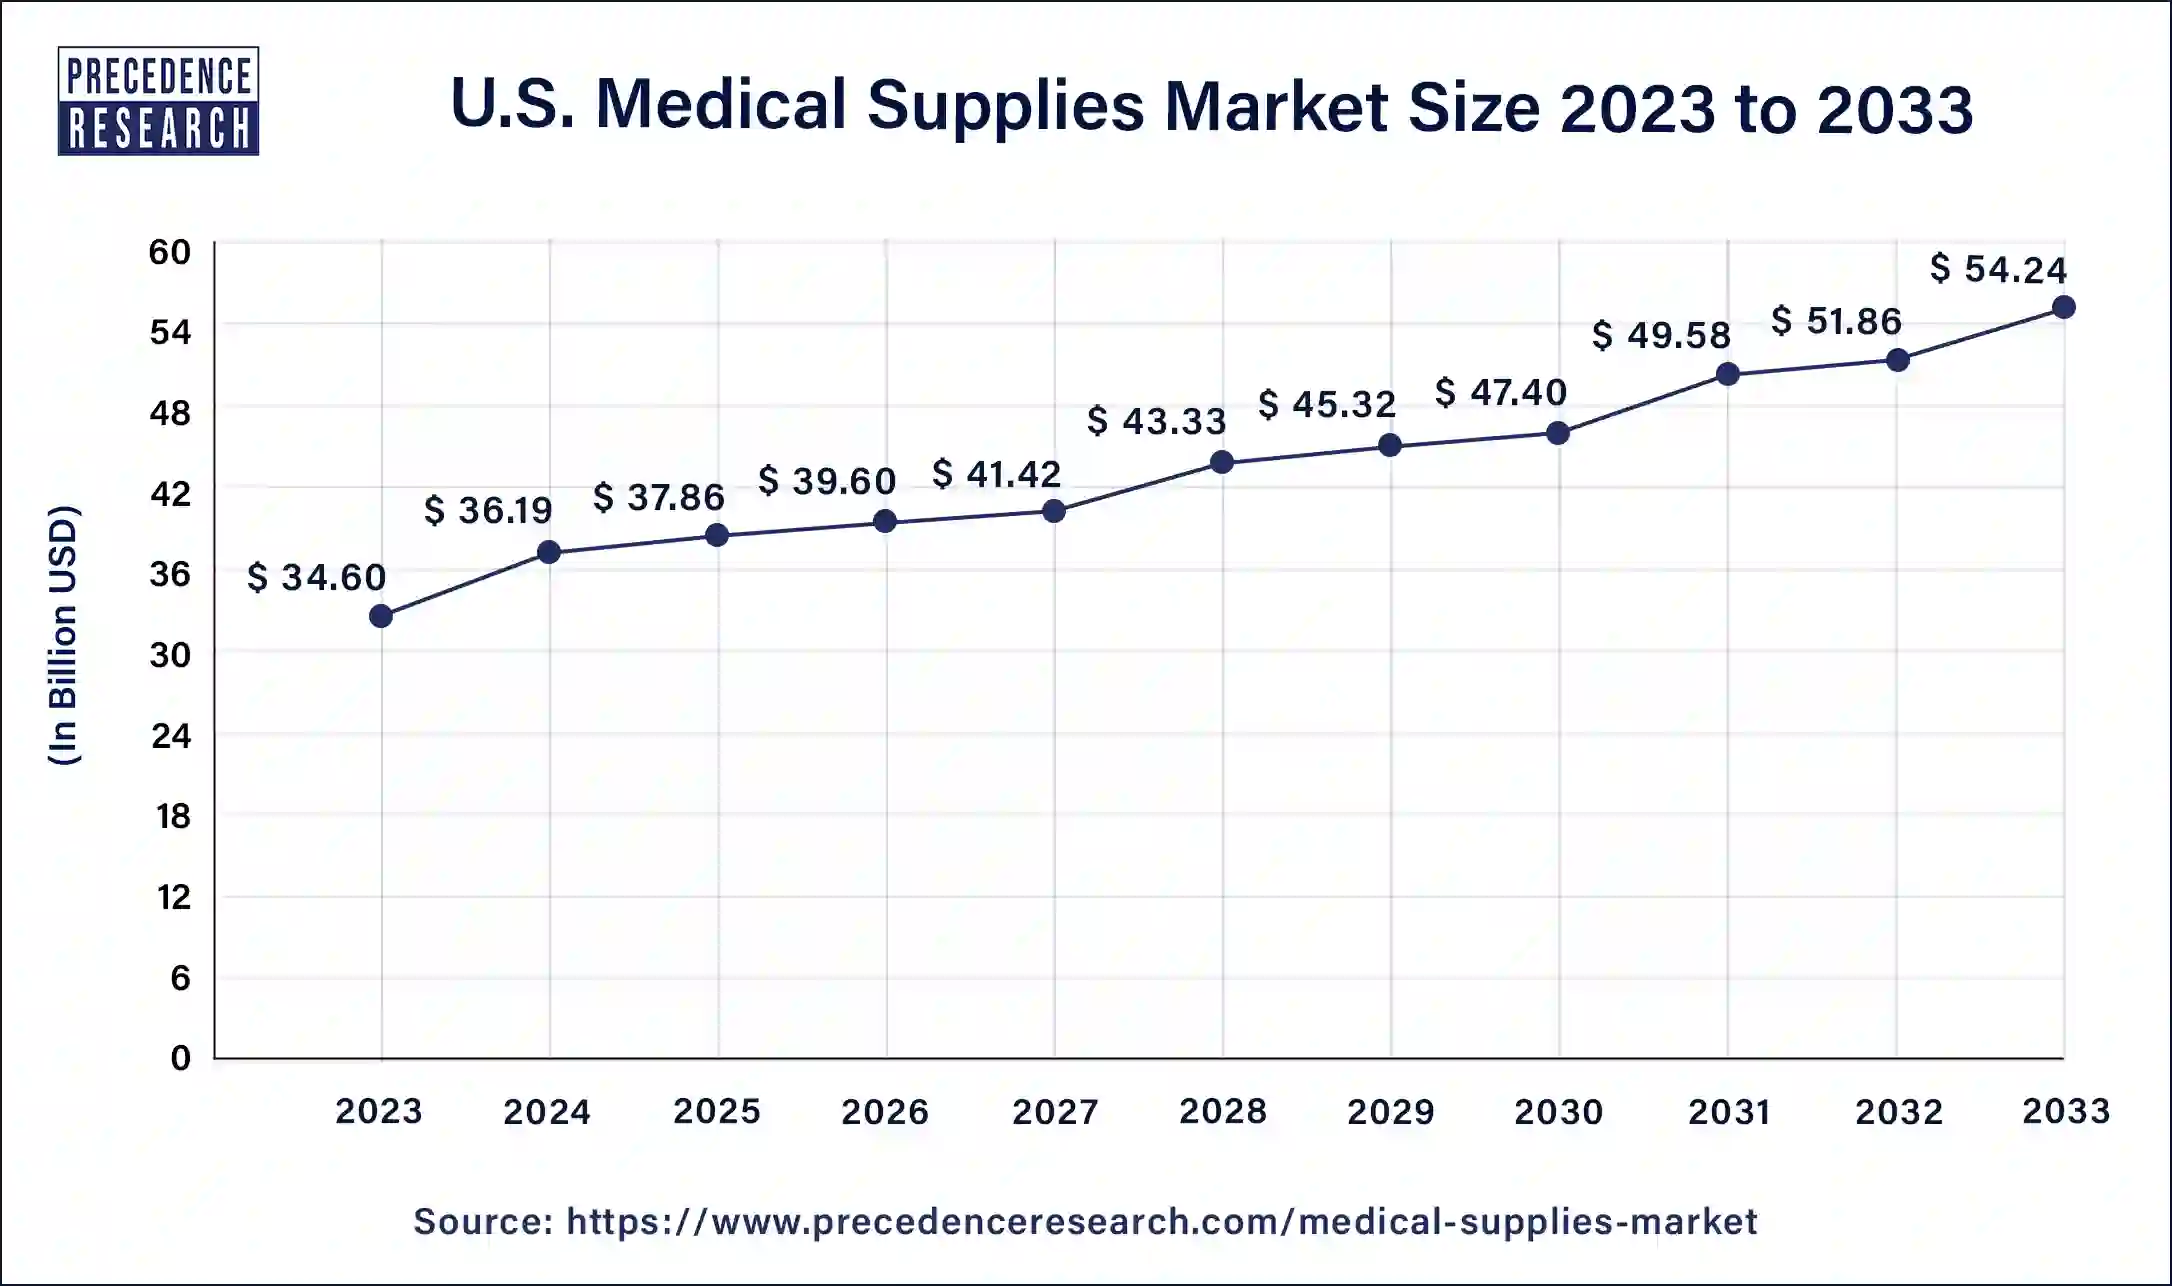 U.S. Medical Supplies Market Size 2024 to 2033